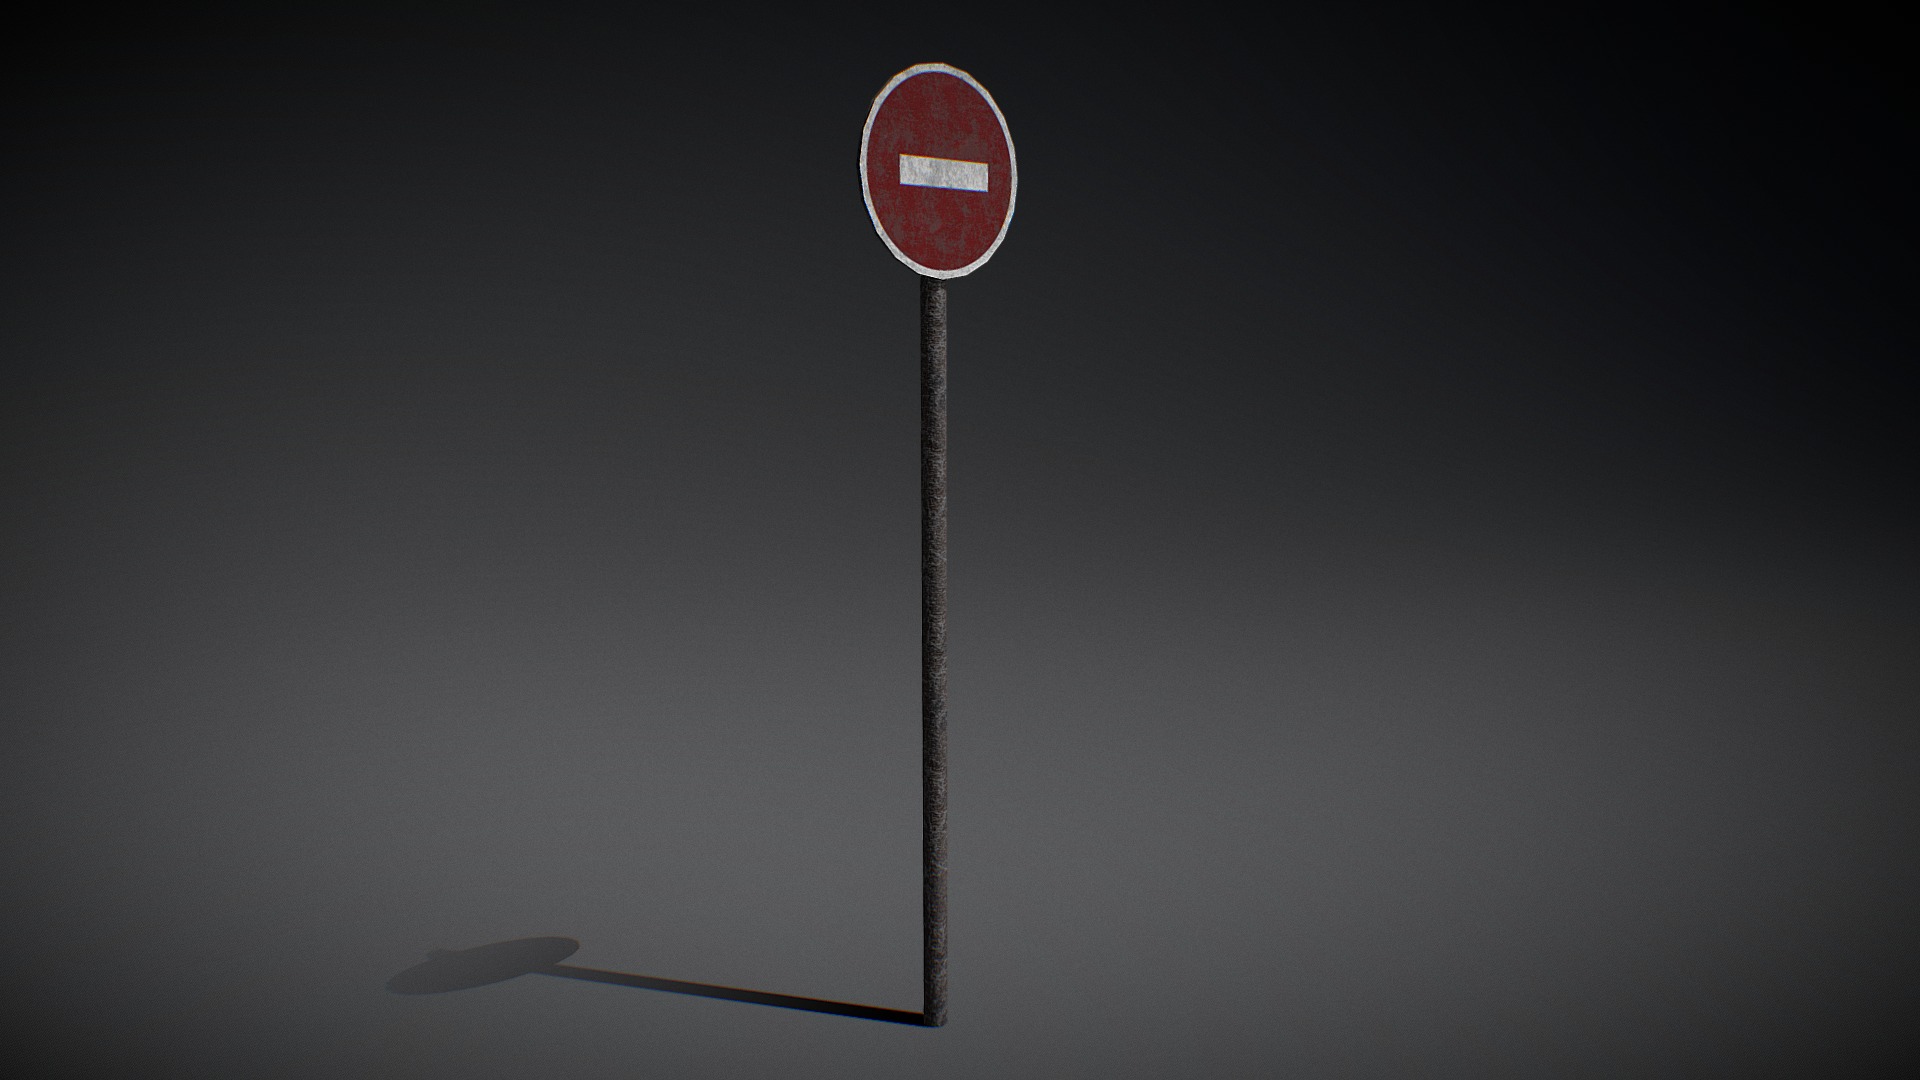 3D model no entry - This is a 3D model of the no entry. The 3D model is about a red sign on a pole.